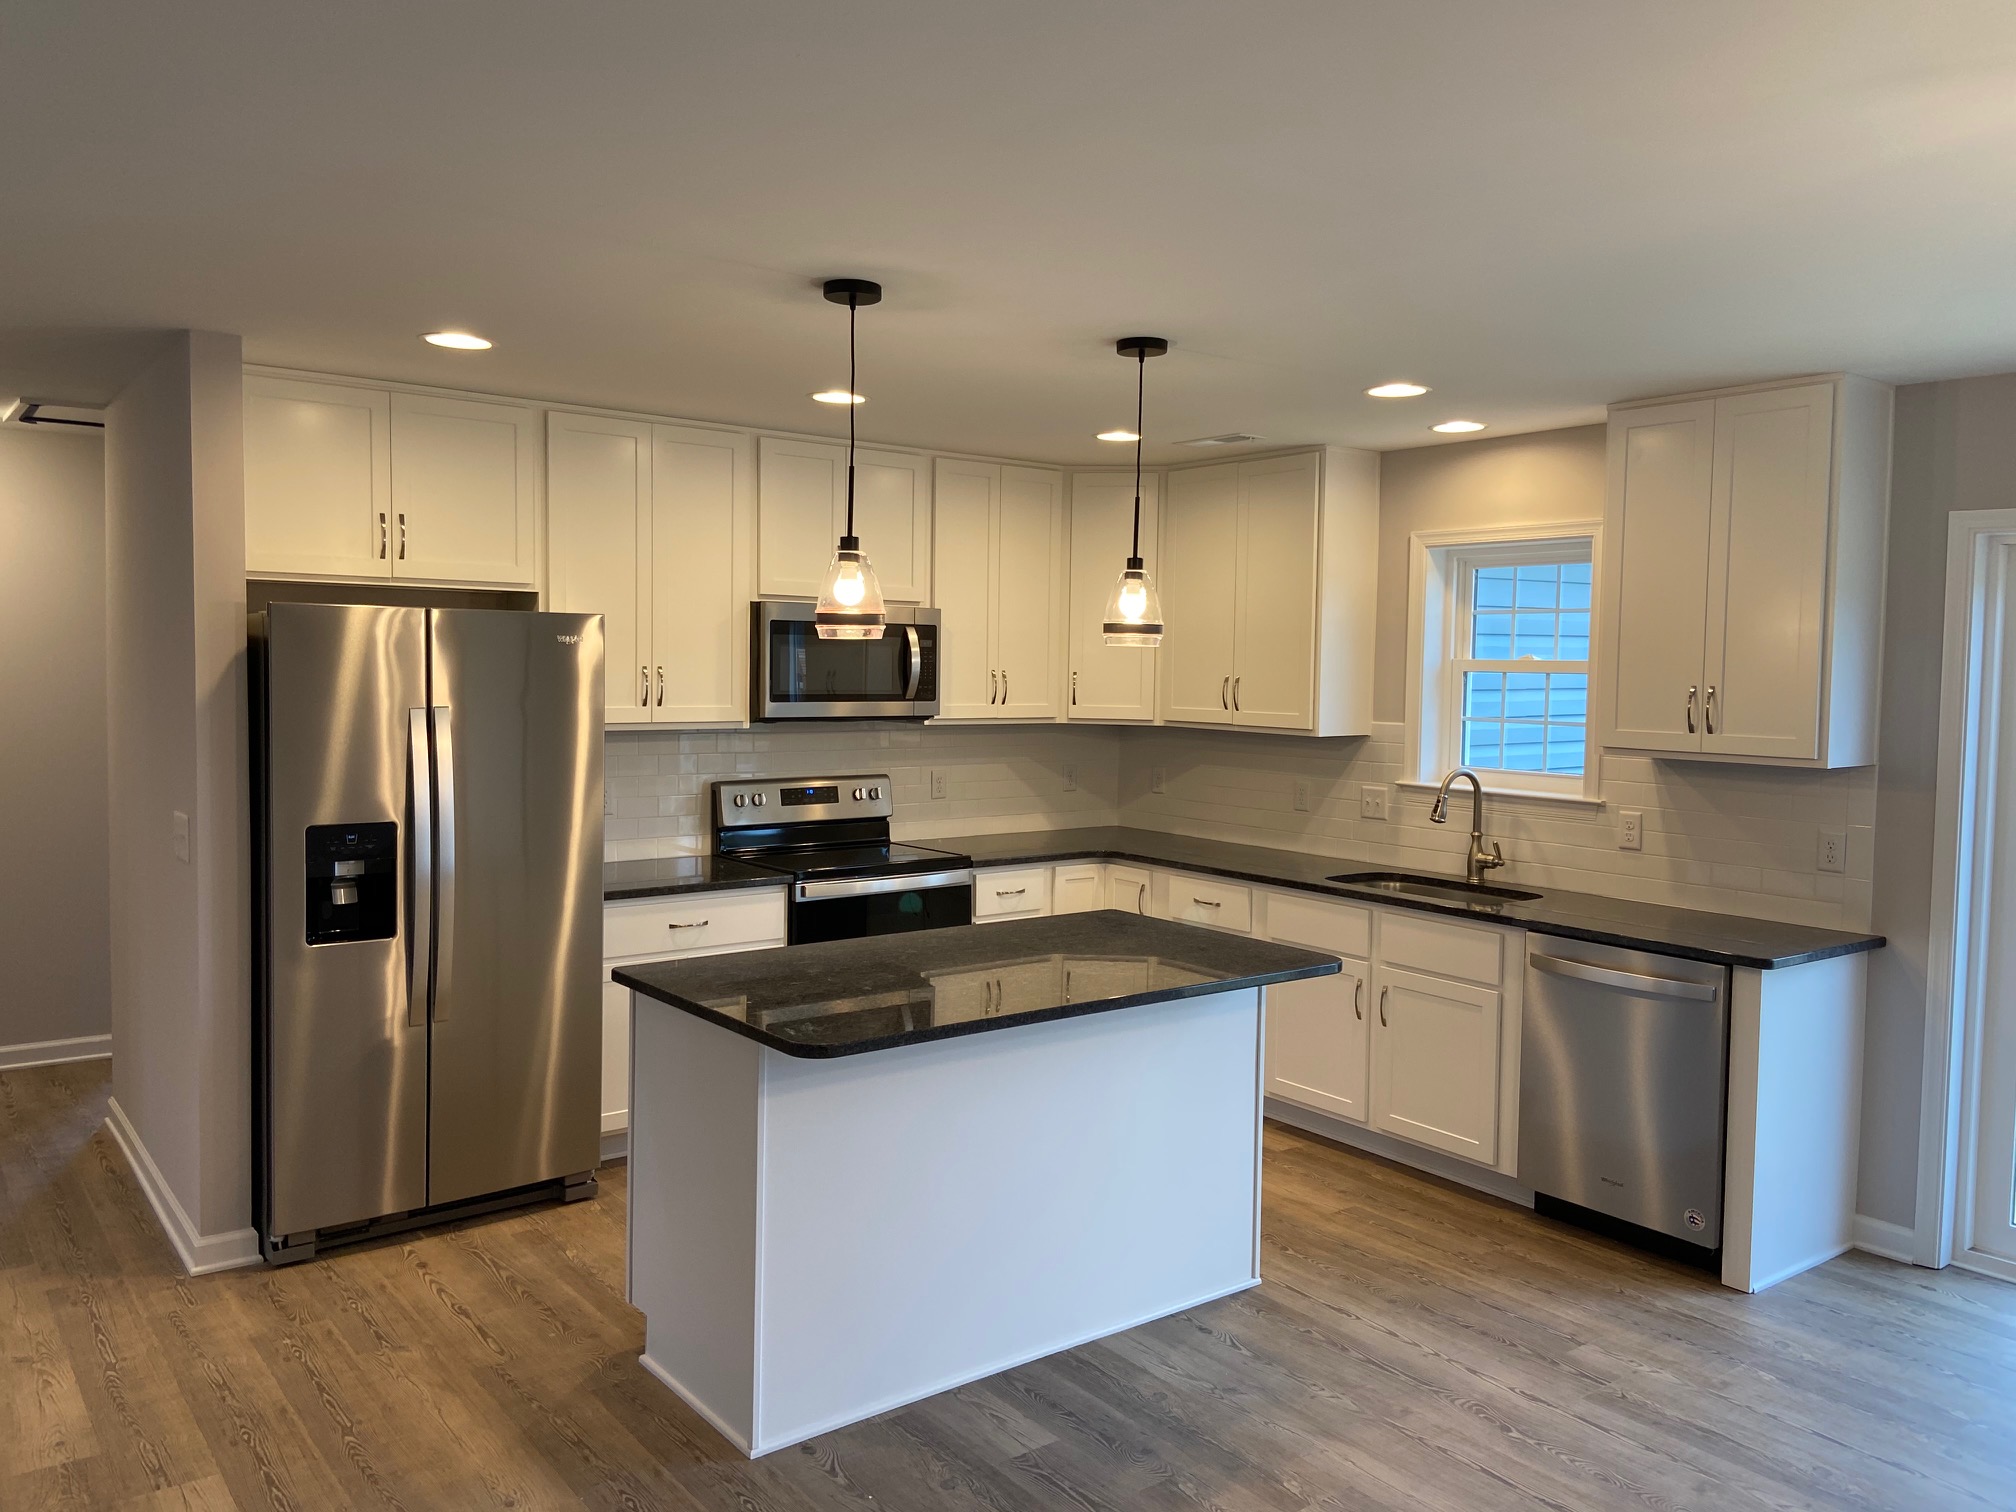 New Home, Kitchen, Seely Homes, Delaware, Kitchen